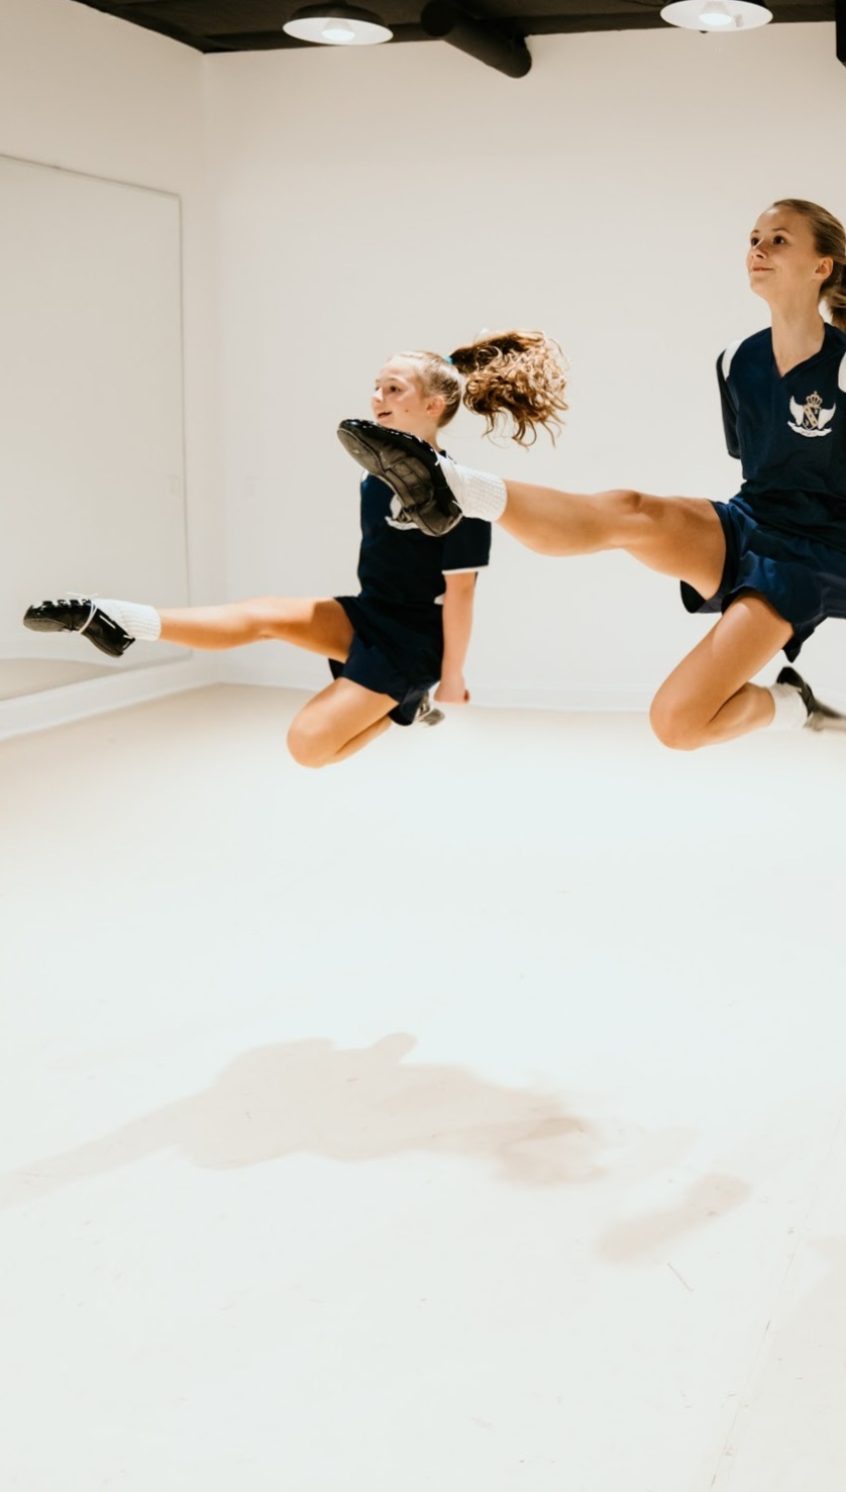 Two students leaping in unison with their right legs straight out in front of them